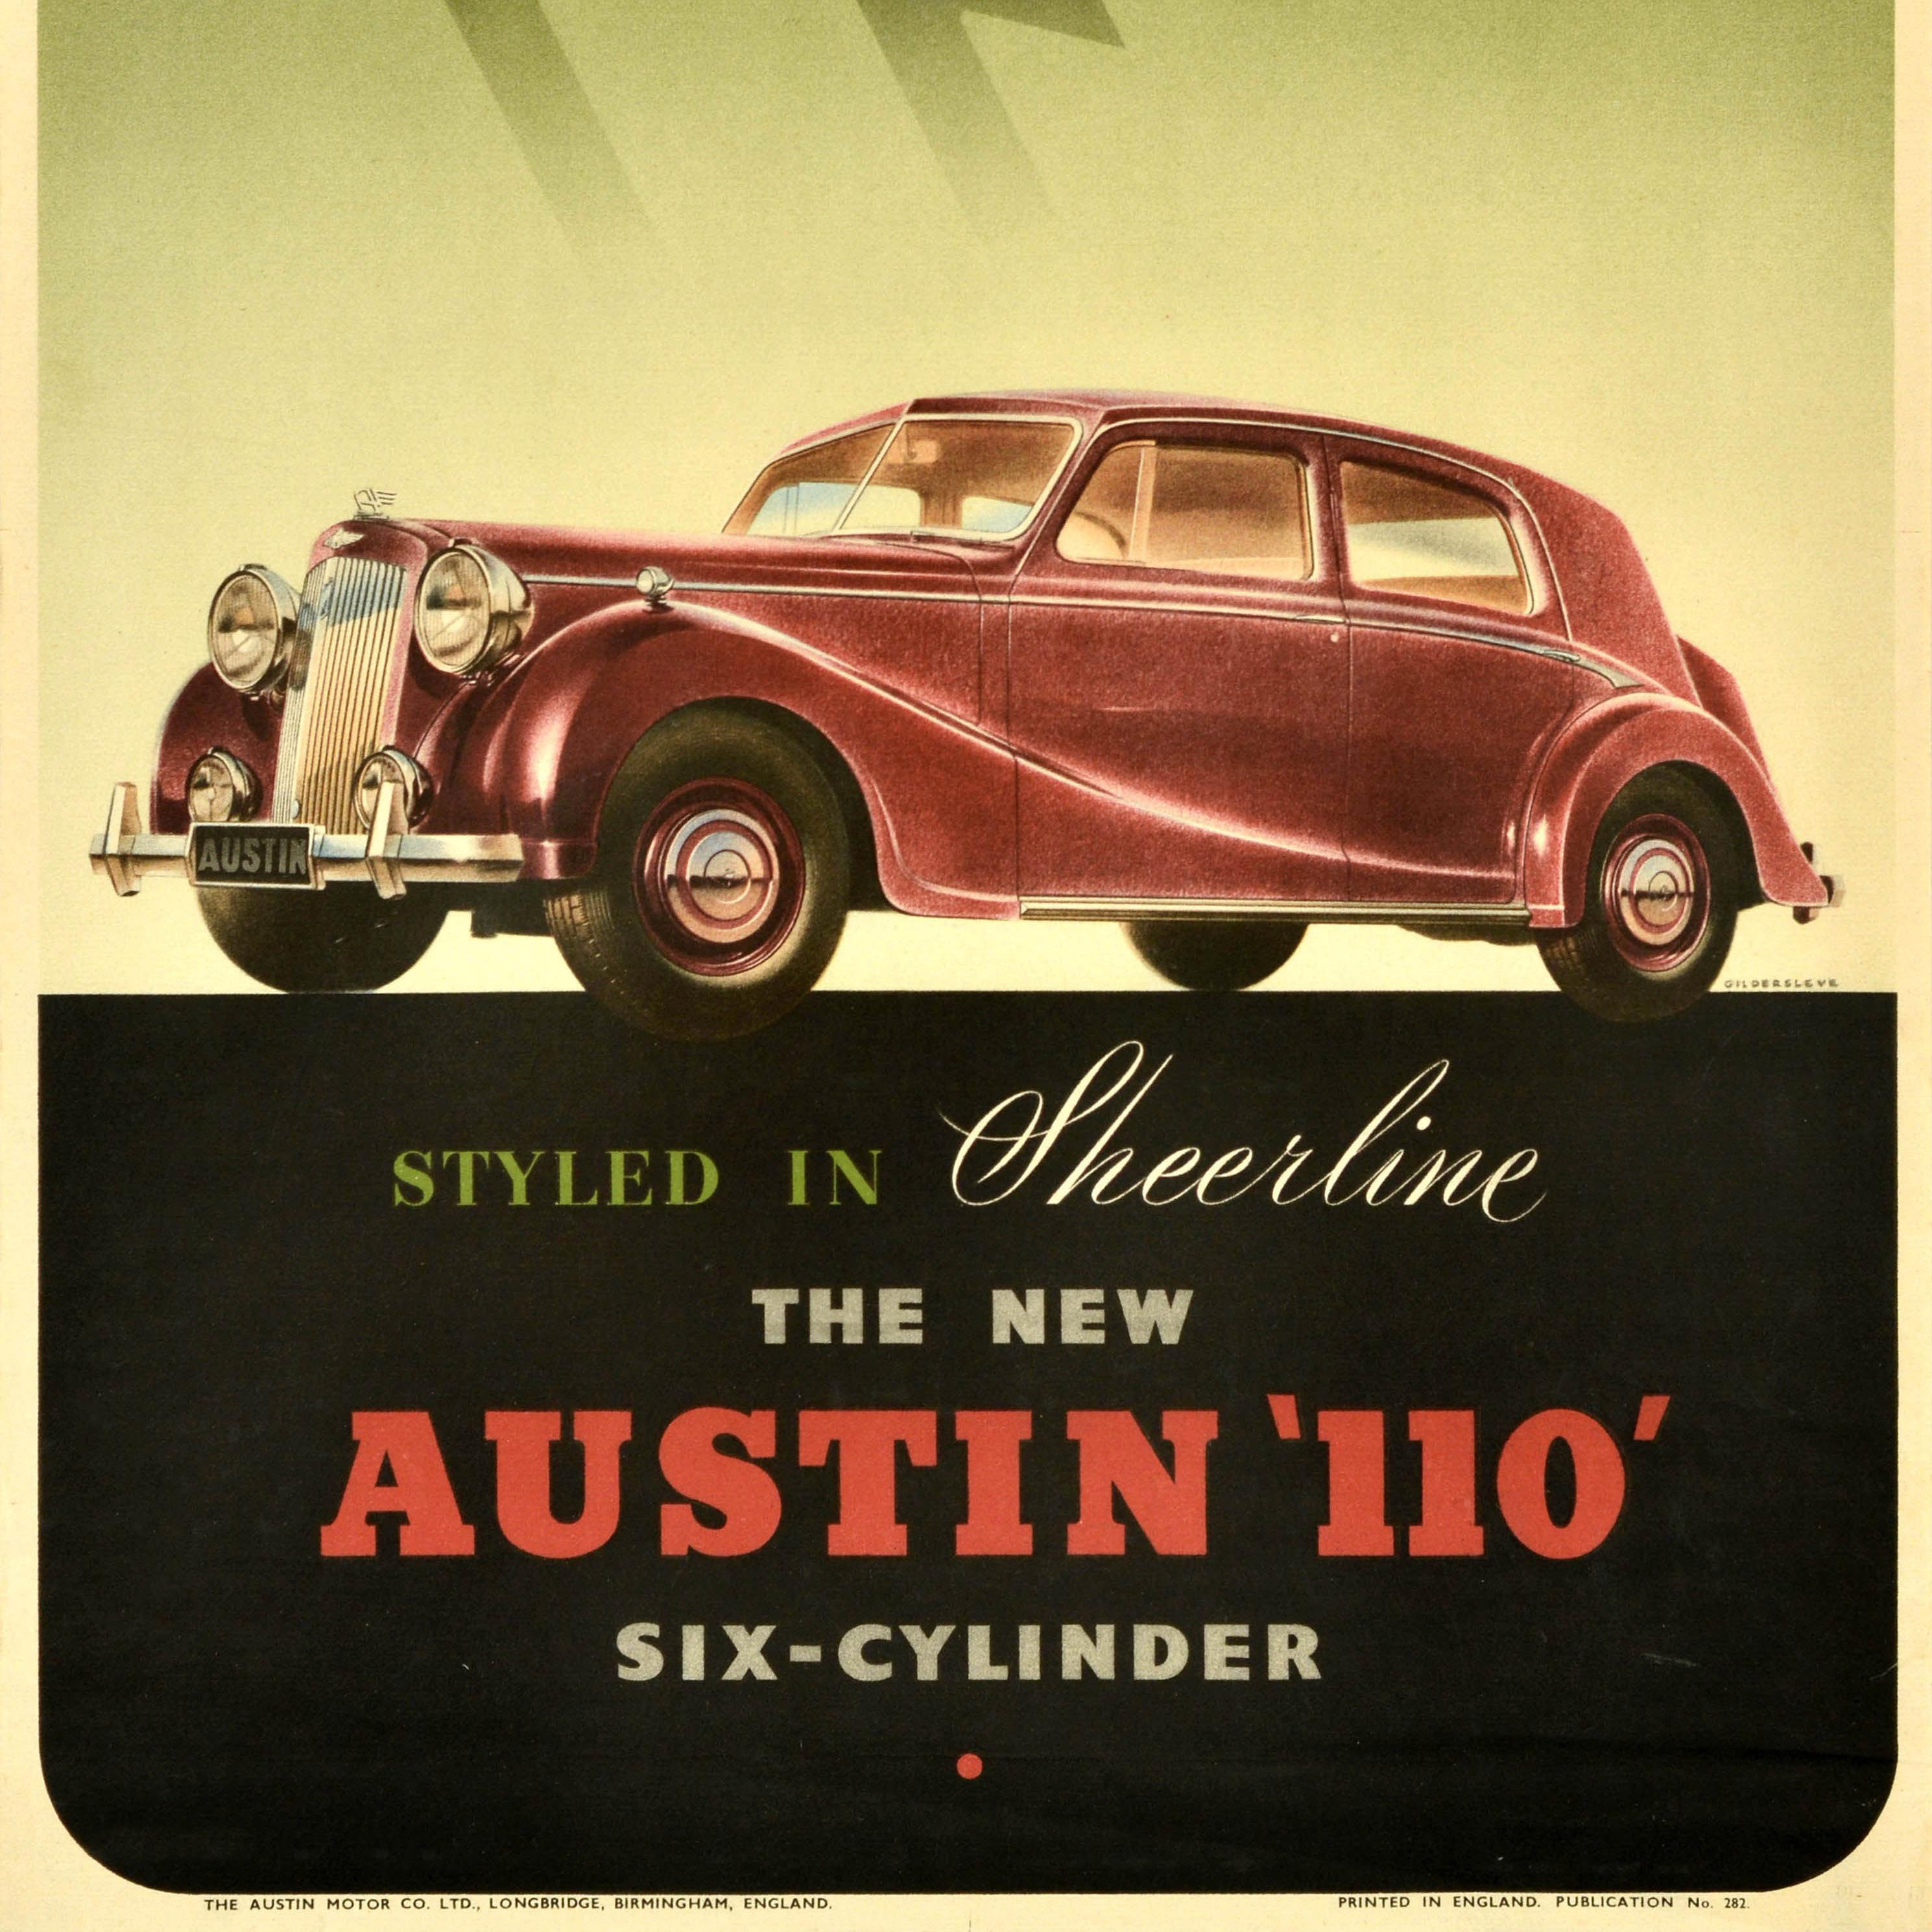 Original Vintage Auto Advertising Poster Austin 110 Sheerline Six Cylinder Car In Good Condition For Sale In London, GB